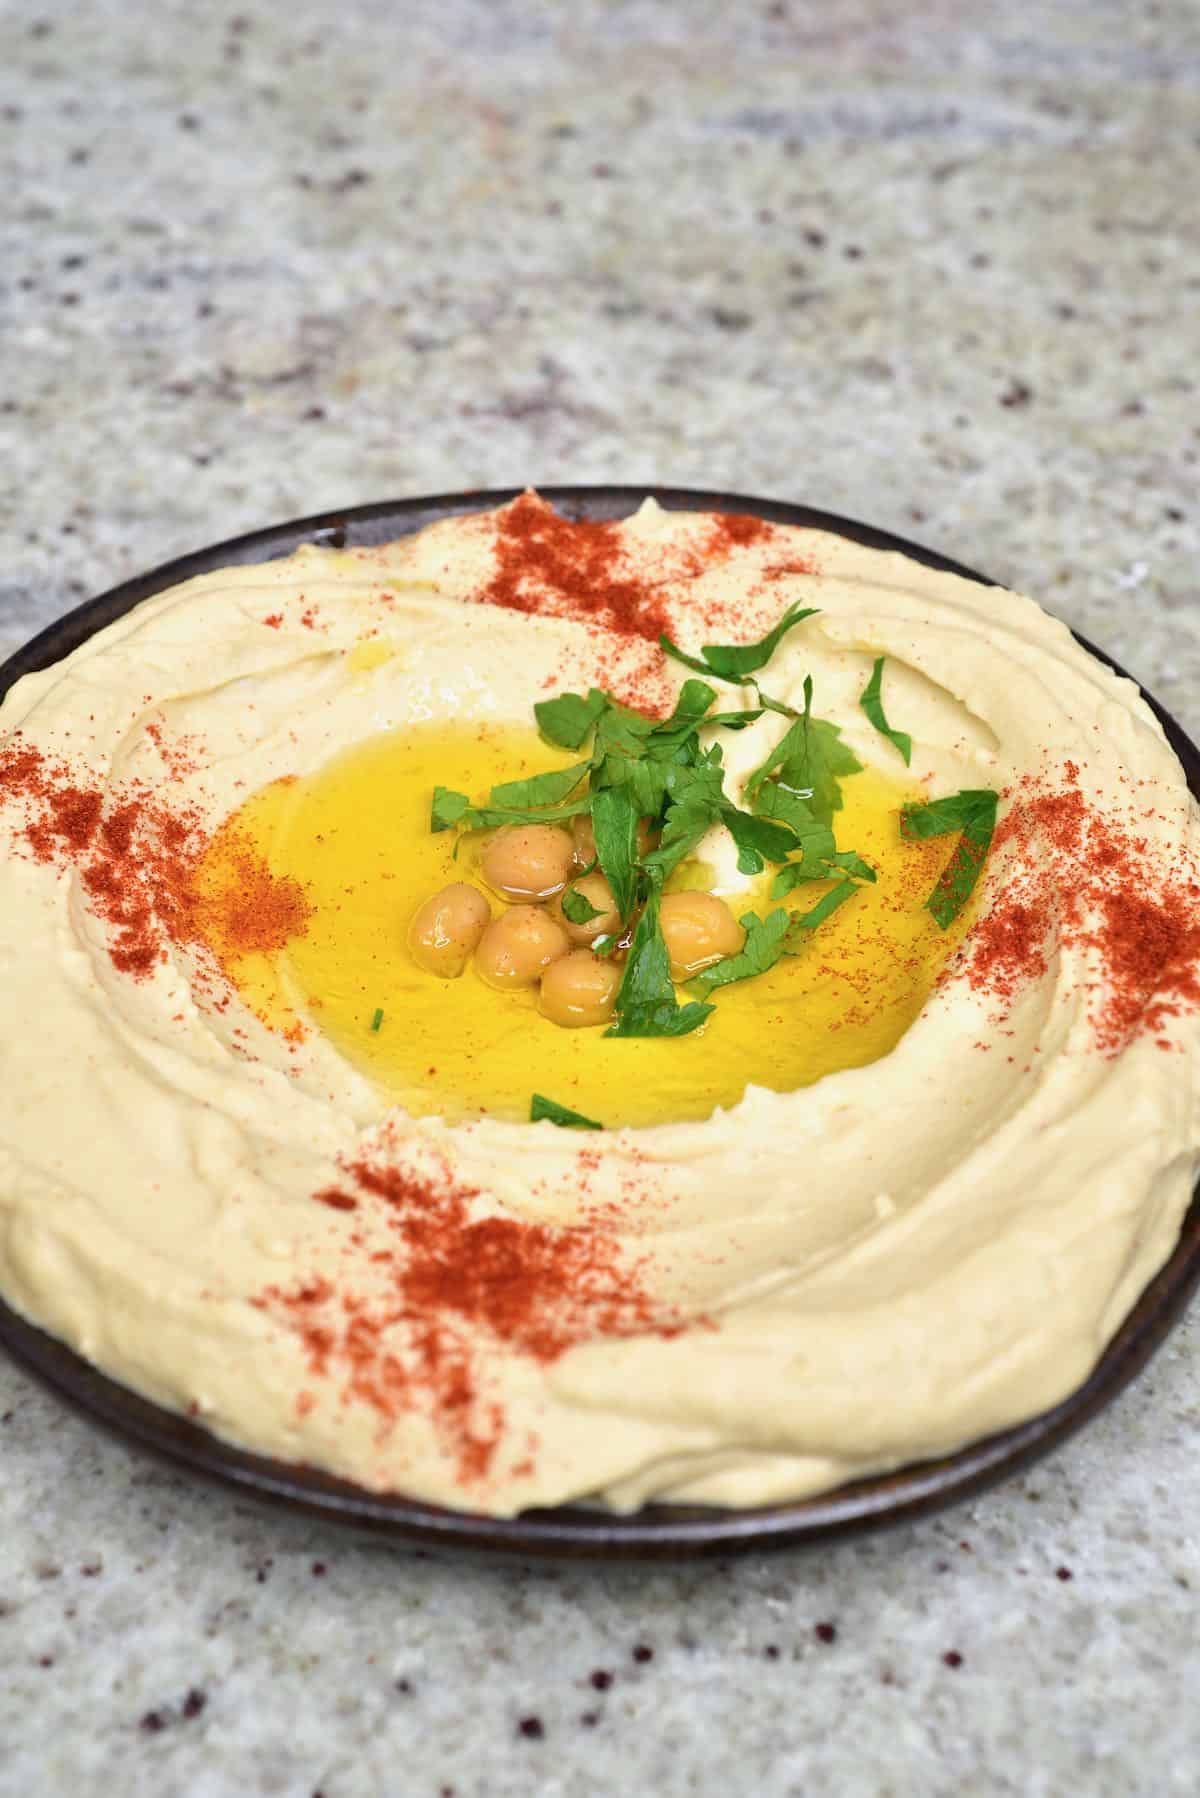 A bowl with hummus topped with some oil, chickpeas, paprika and coriander